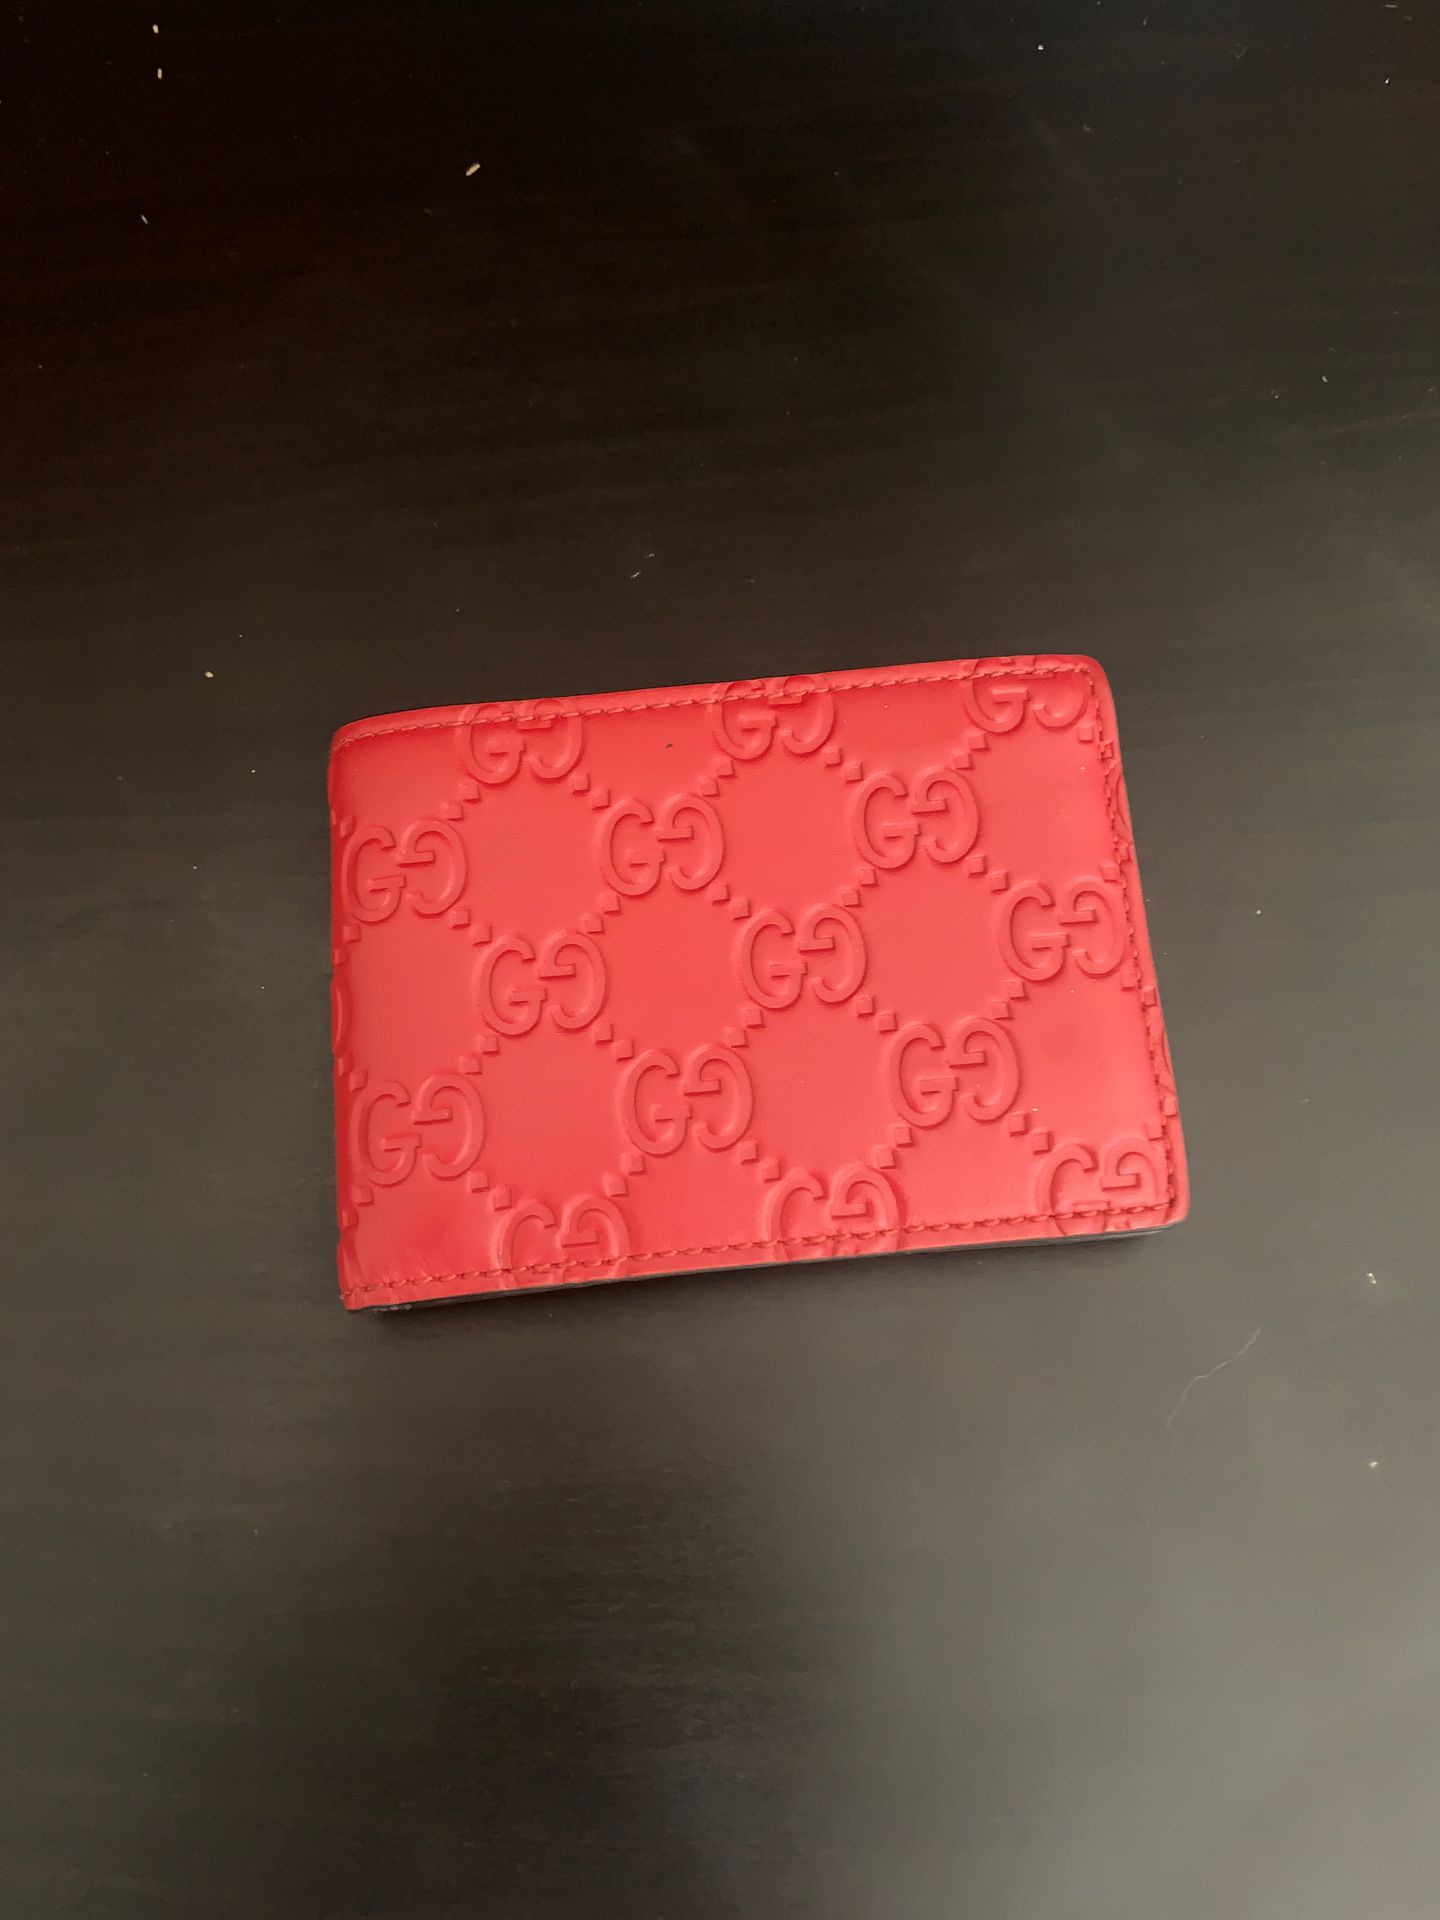 Authentic Red Leather Gucci Wallet